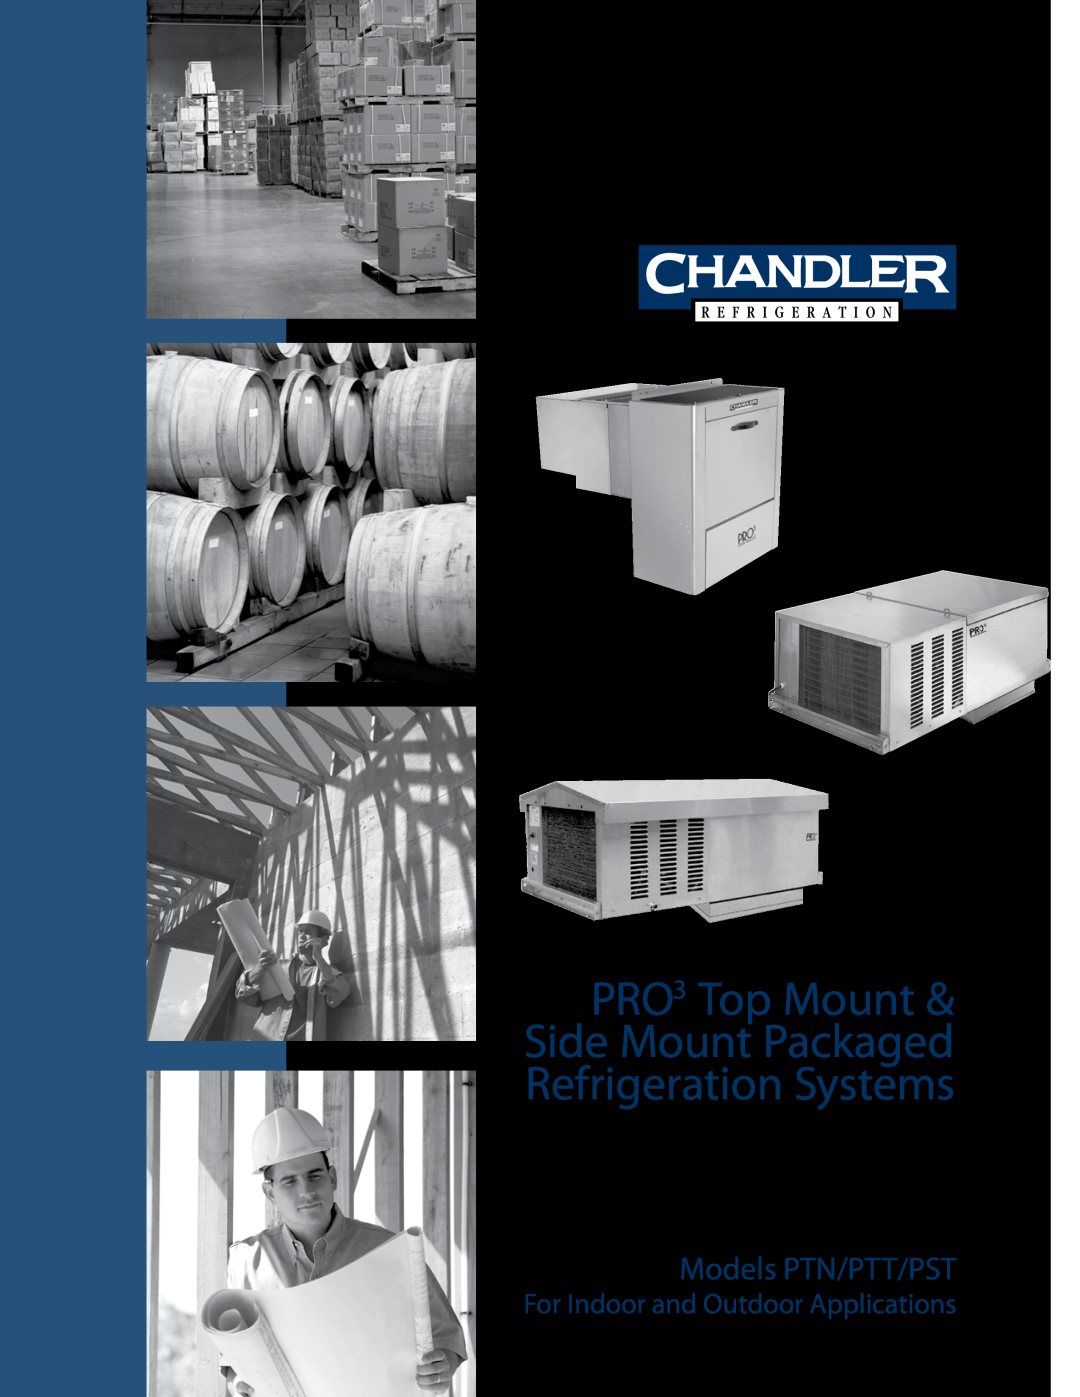 Heatcraft Refrigeration Products PTN manual PRO3 Top Mount & Side Mount Packaged, Refrigeration Systems, Technical Guide 